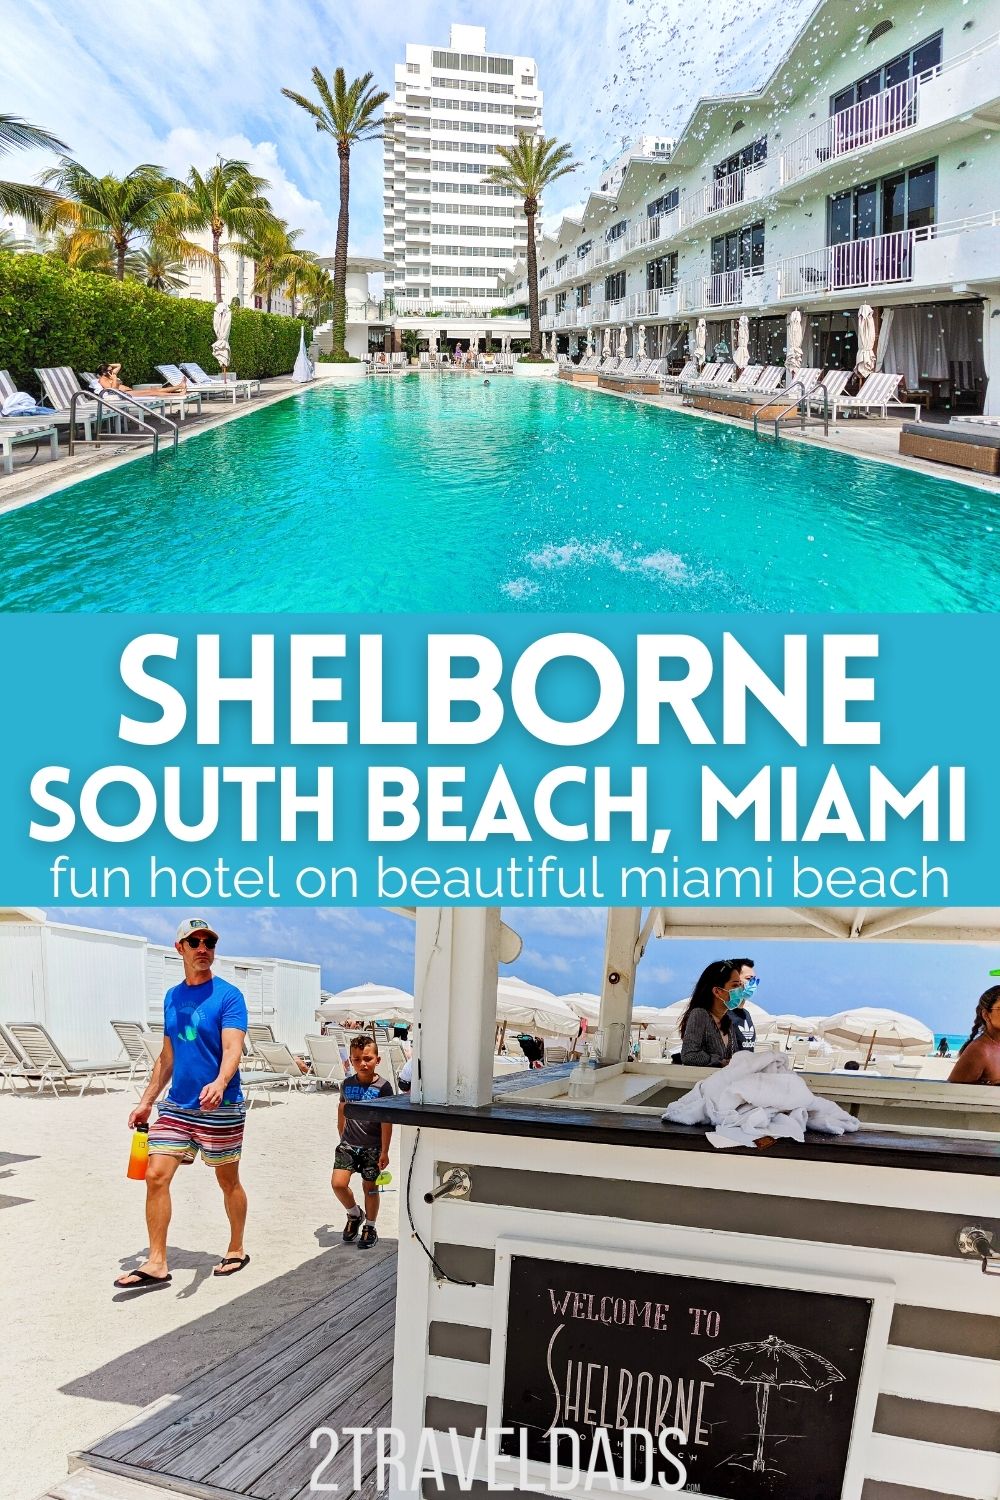 Review of the Shelborne South Beach hotel in Miami, including things to do and dining recommendations in the Art Deco District of Miami Beach. Tips for planning a fun weekend getaway to the Shelborne on the beach.